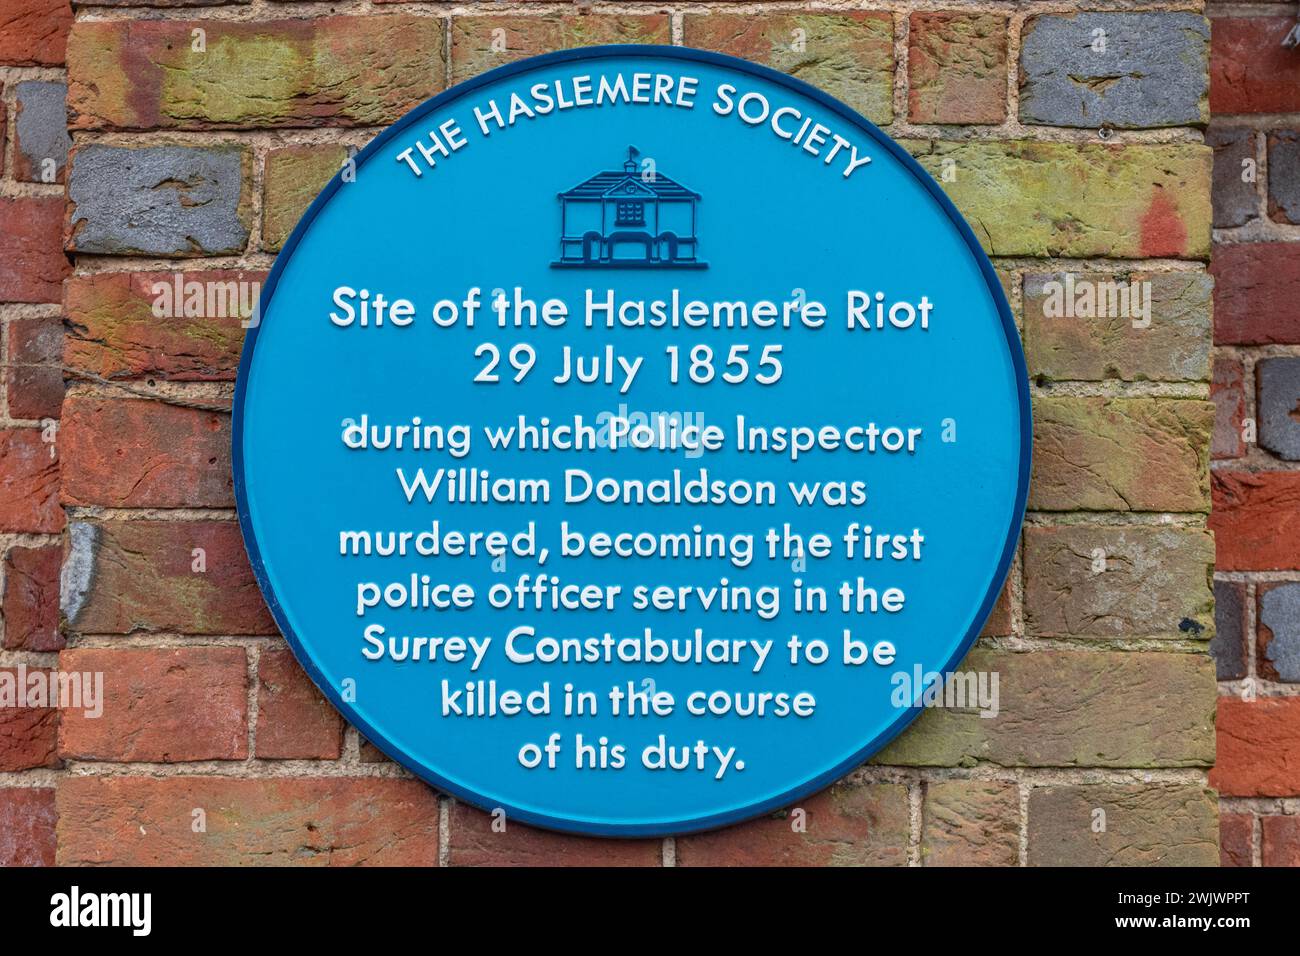 The Haslemere Society Blue Plaque showing the site of the 1855 Haslemere Riot on the town hall, Surrey, England, UK Stock Photo